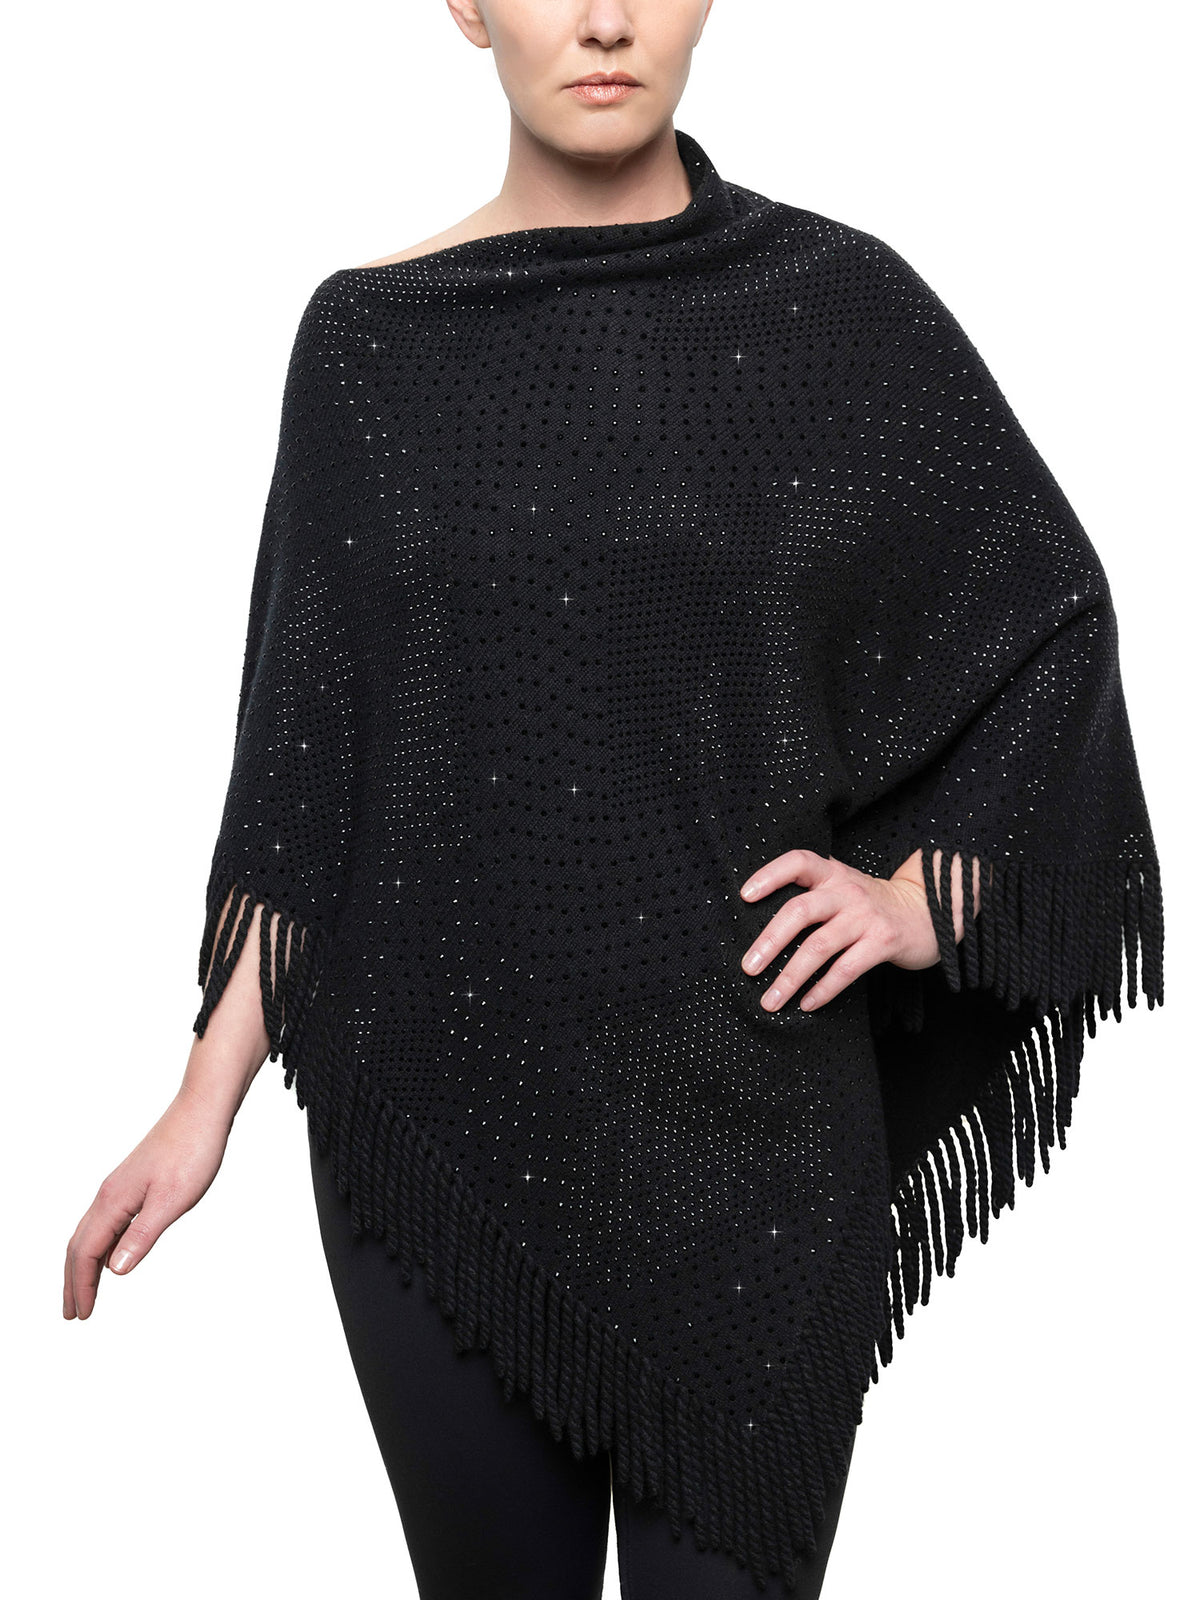 High fashion crystal poncho covered with thousands of black Swarovski crystals. Shown in the color black.